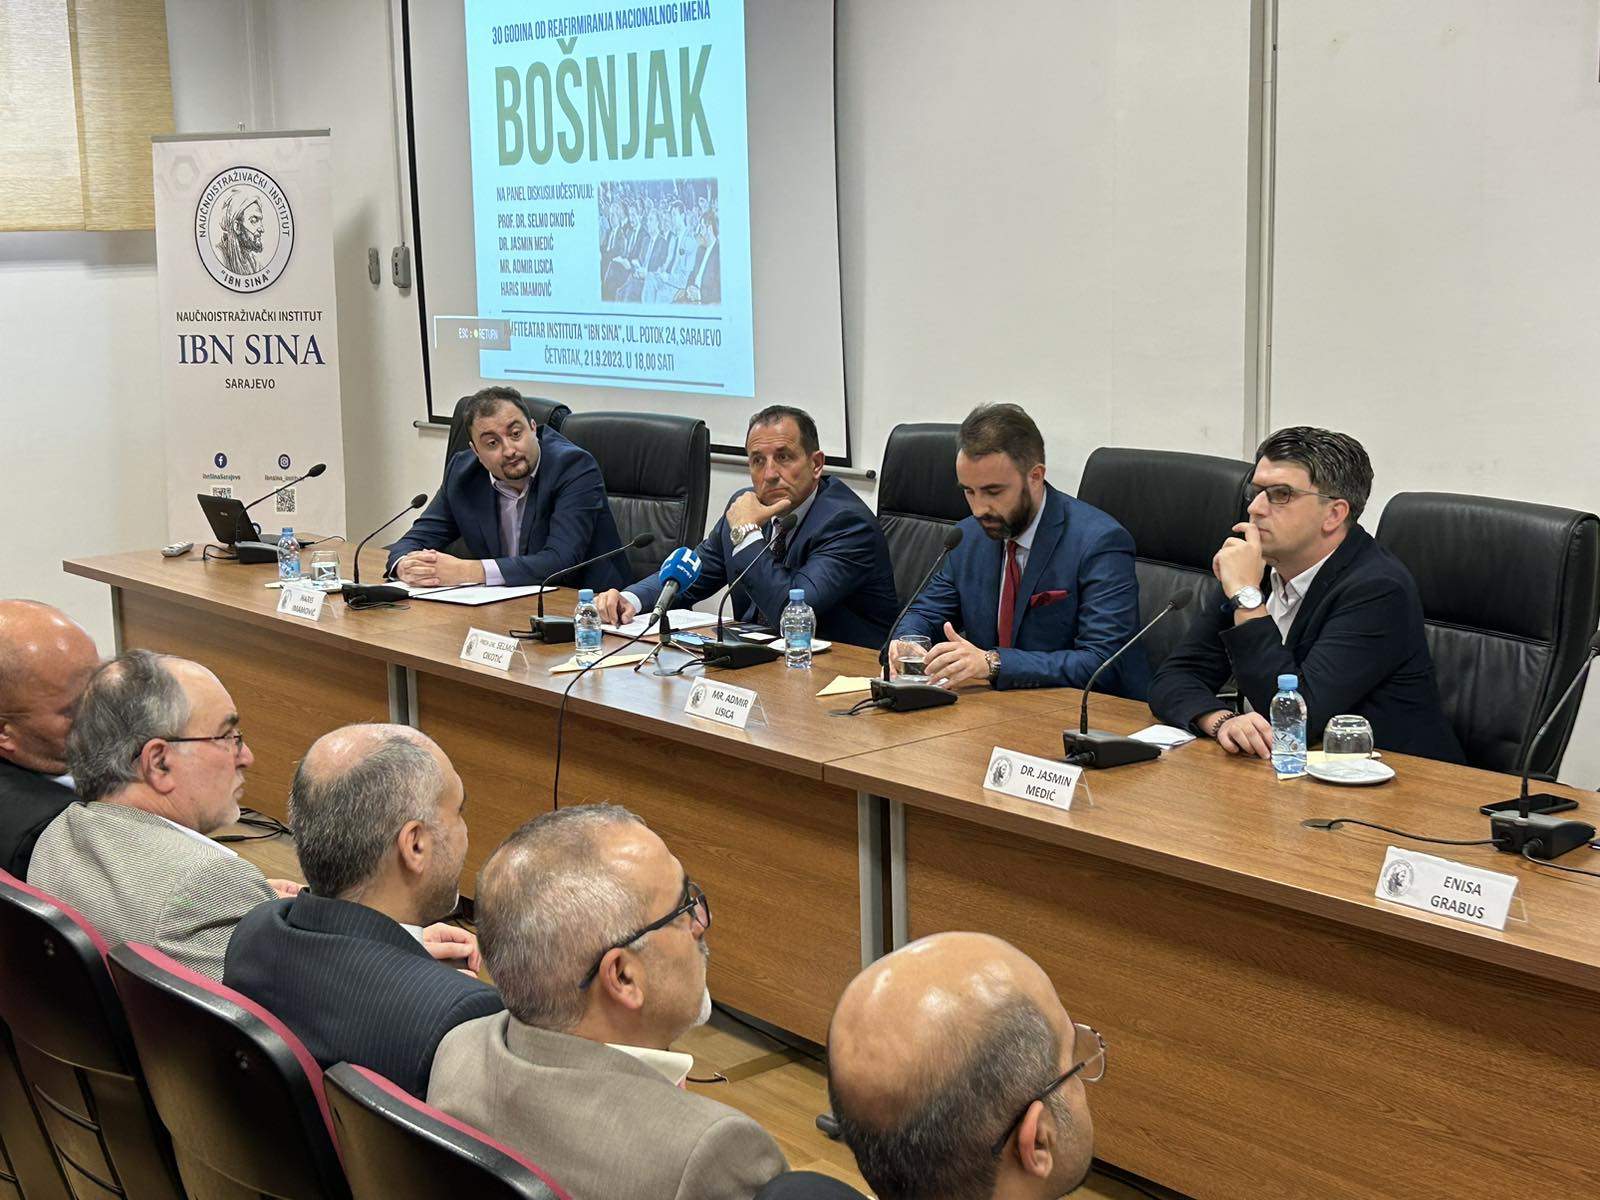 The Centre for Balkan Studies organized a panel discussion on the occasion of marking 30 years since the reaffirmation of the national name Bosniak